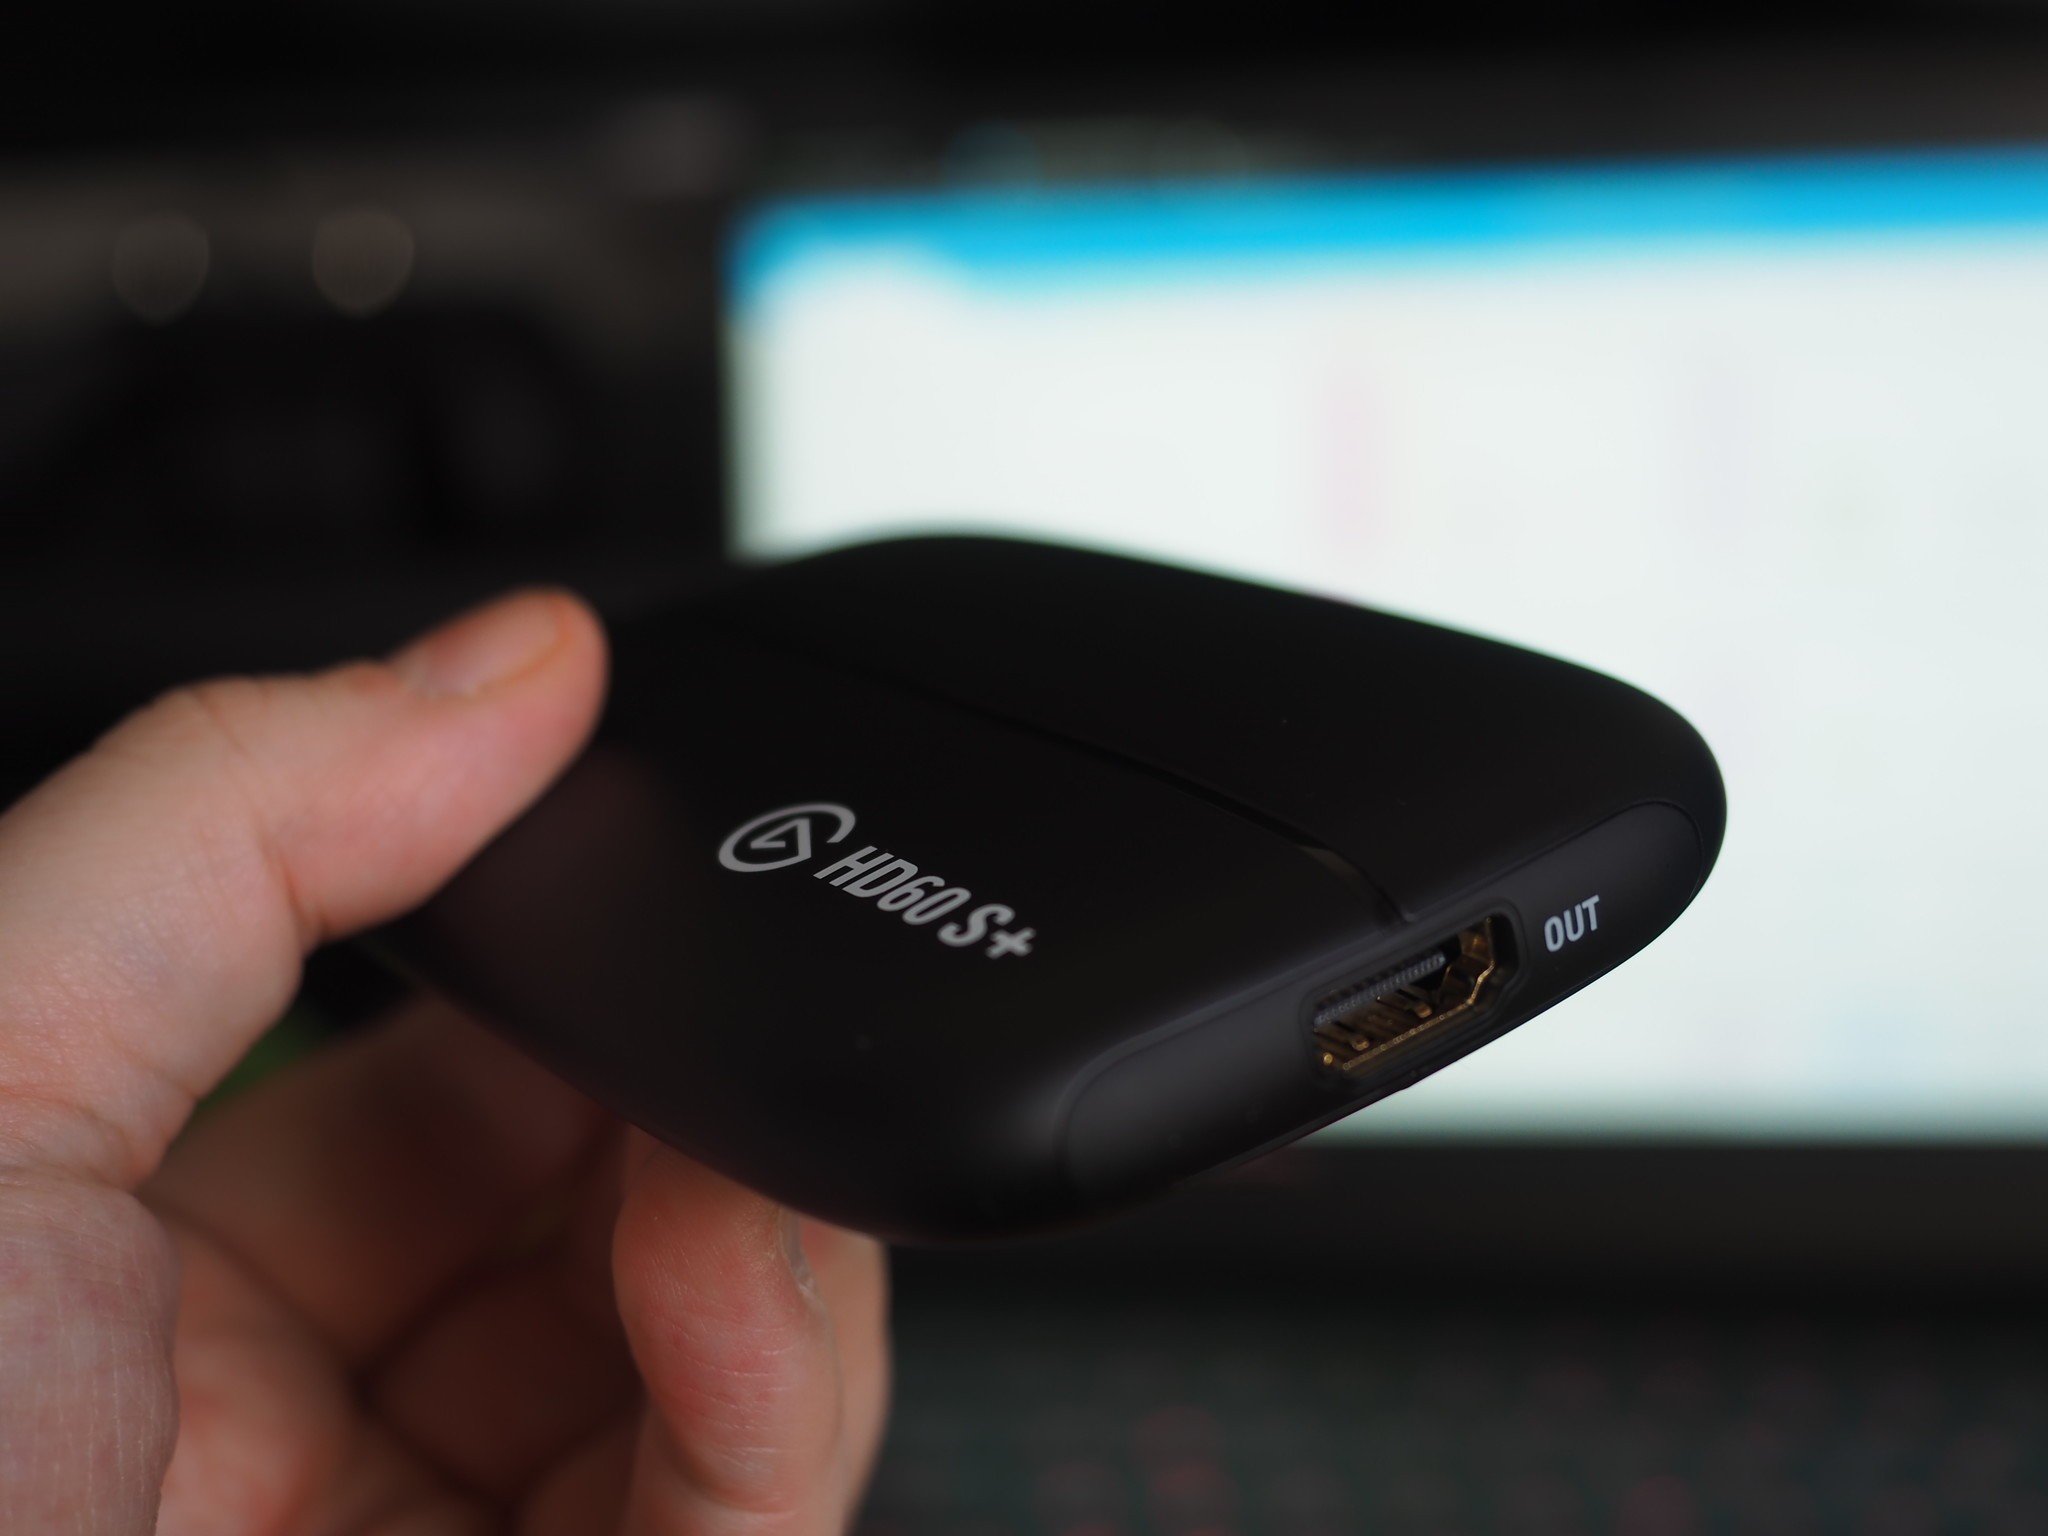 cheap capture card for xbox one